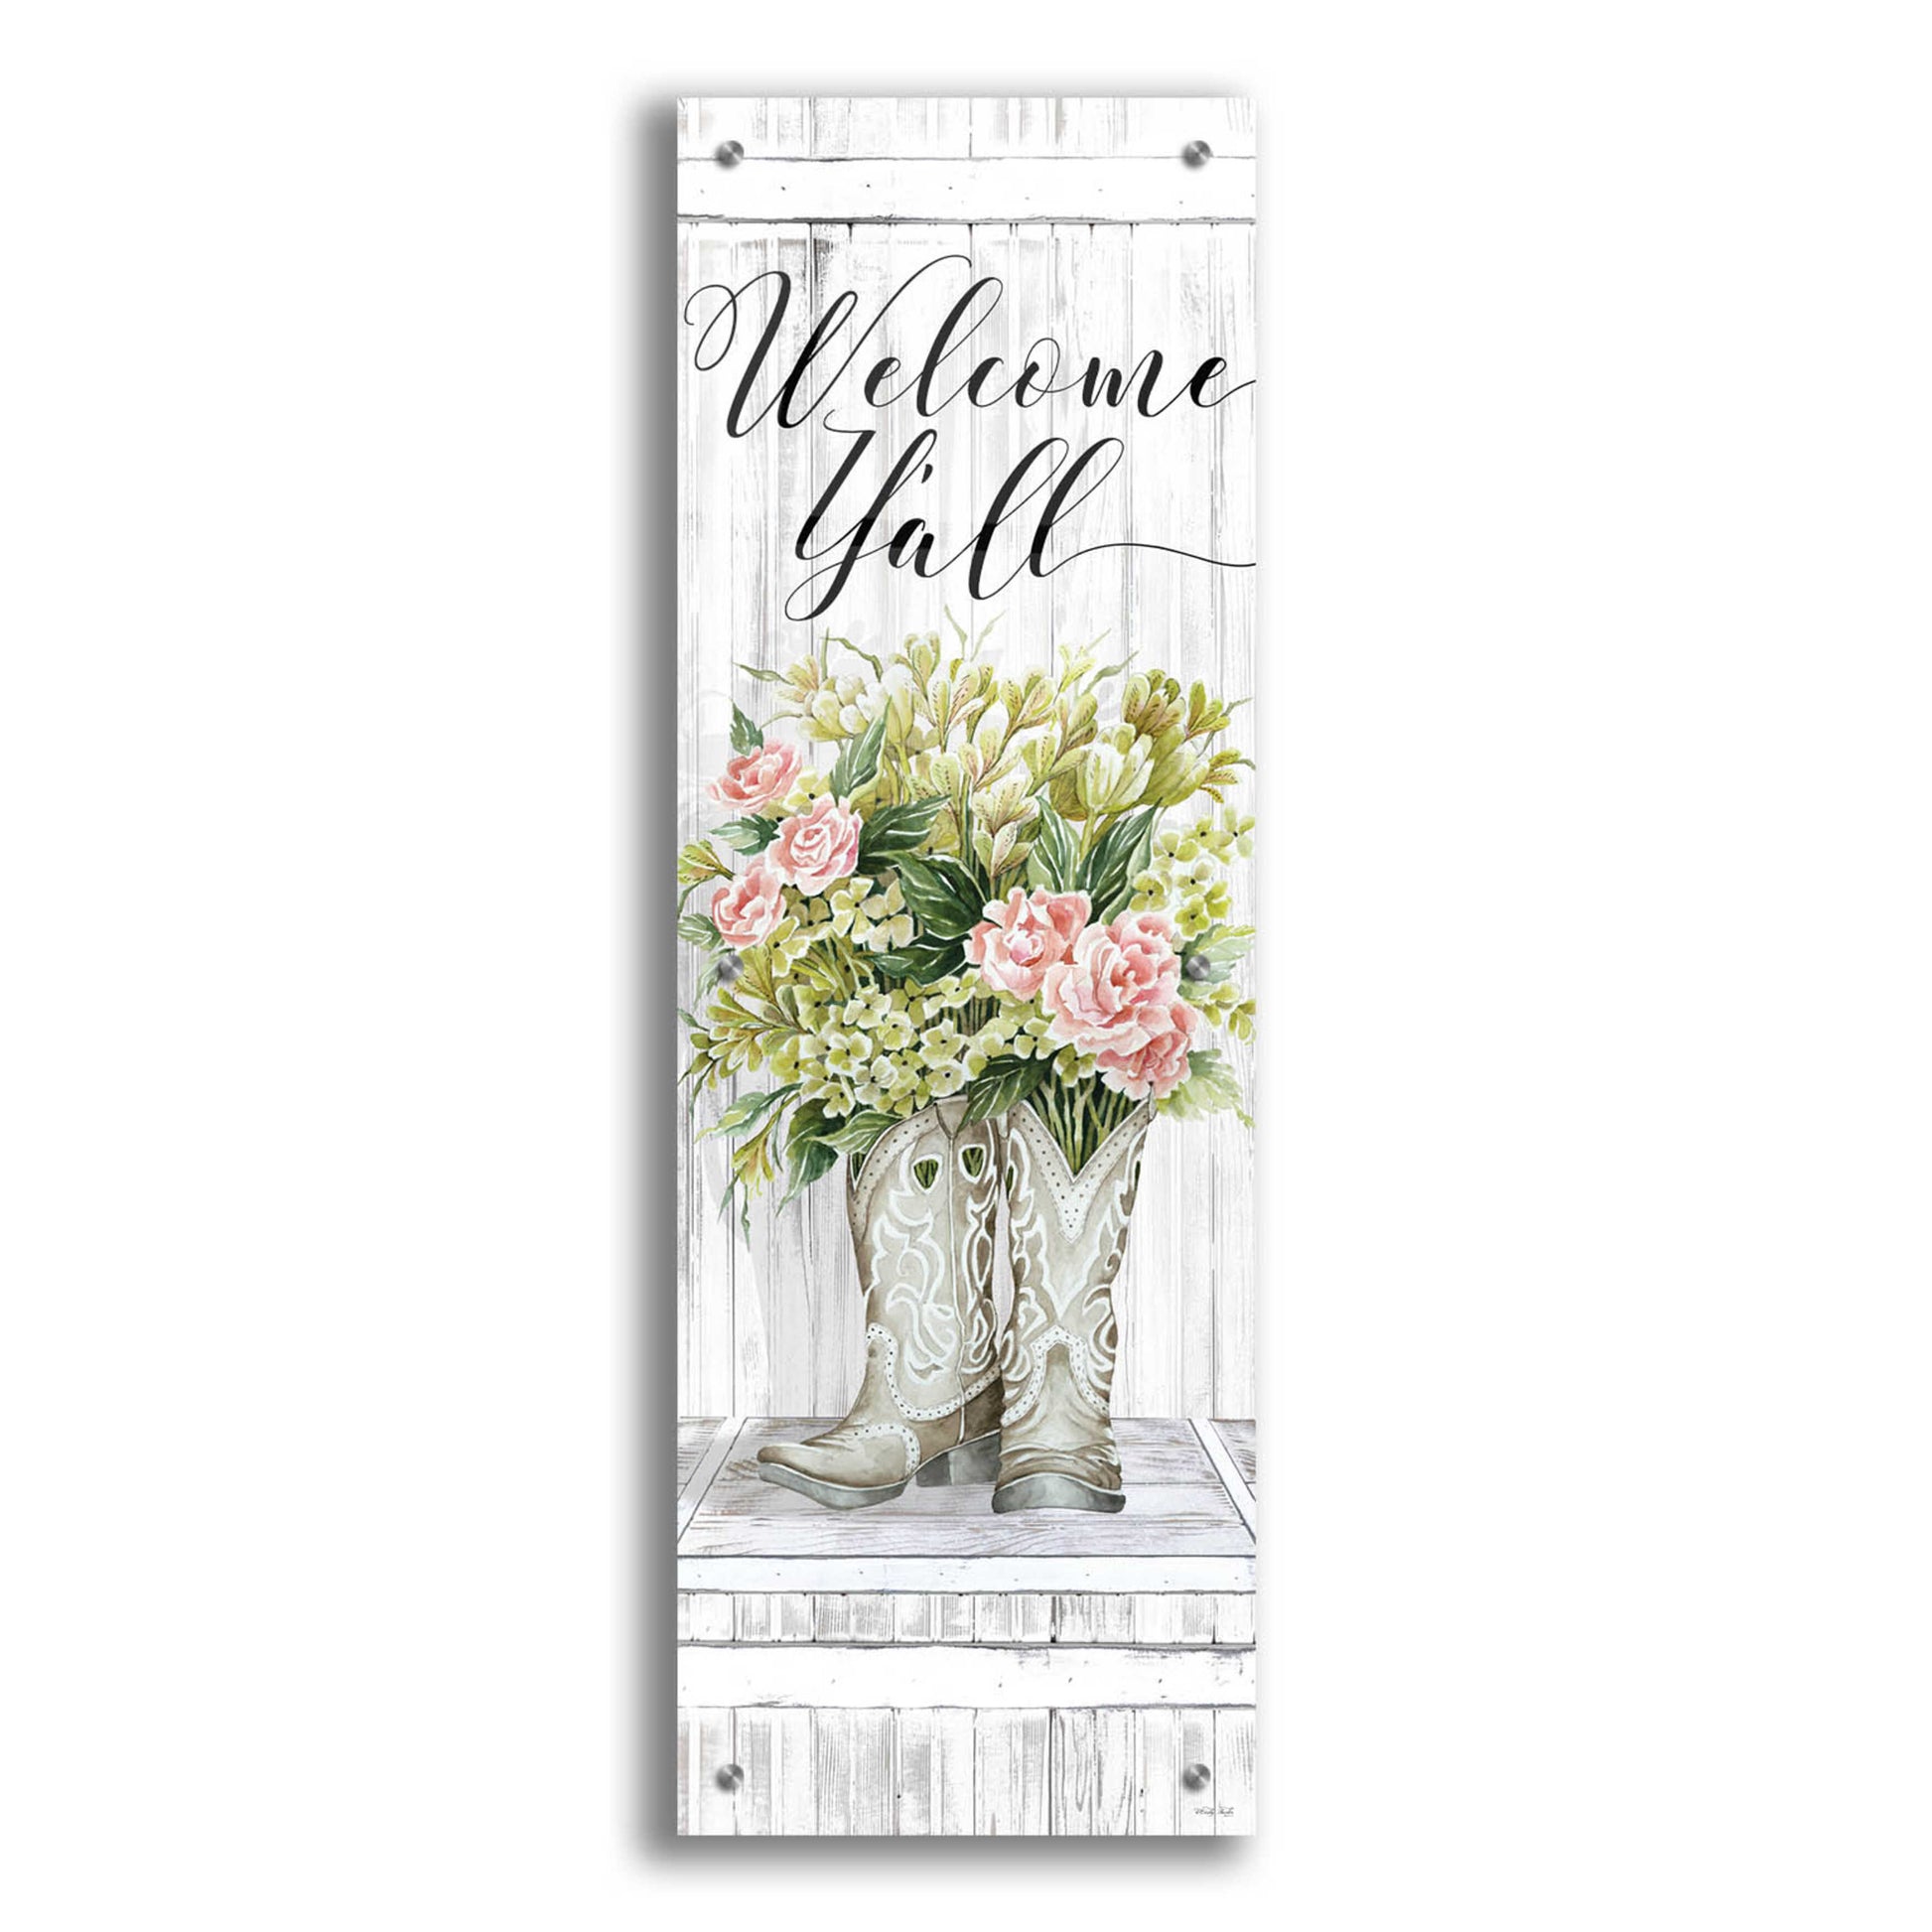 Epic Art 'Welcome Y'all Cowboy Boots' by Cindy Jacobs, Acrylic Glass Wall Art,12x36